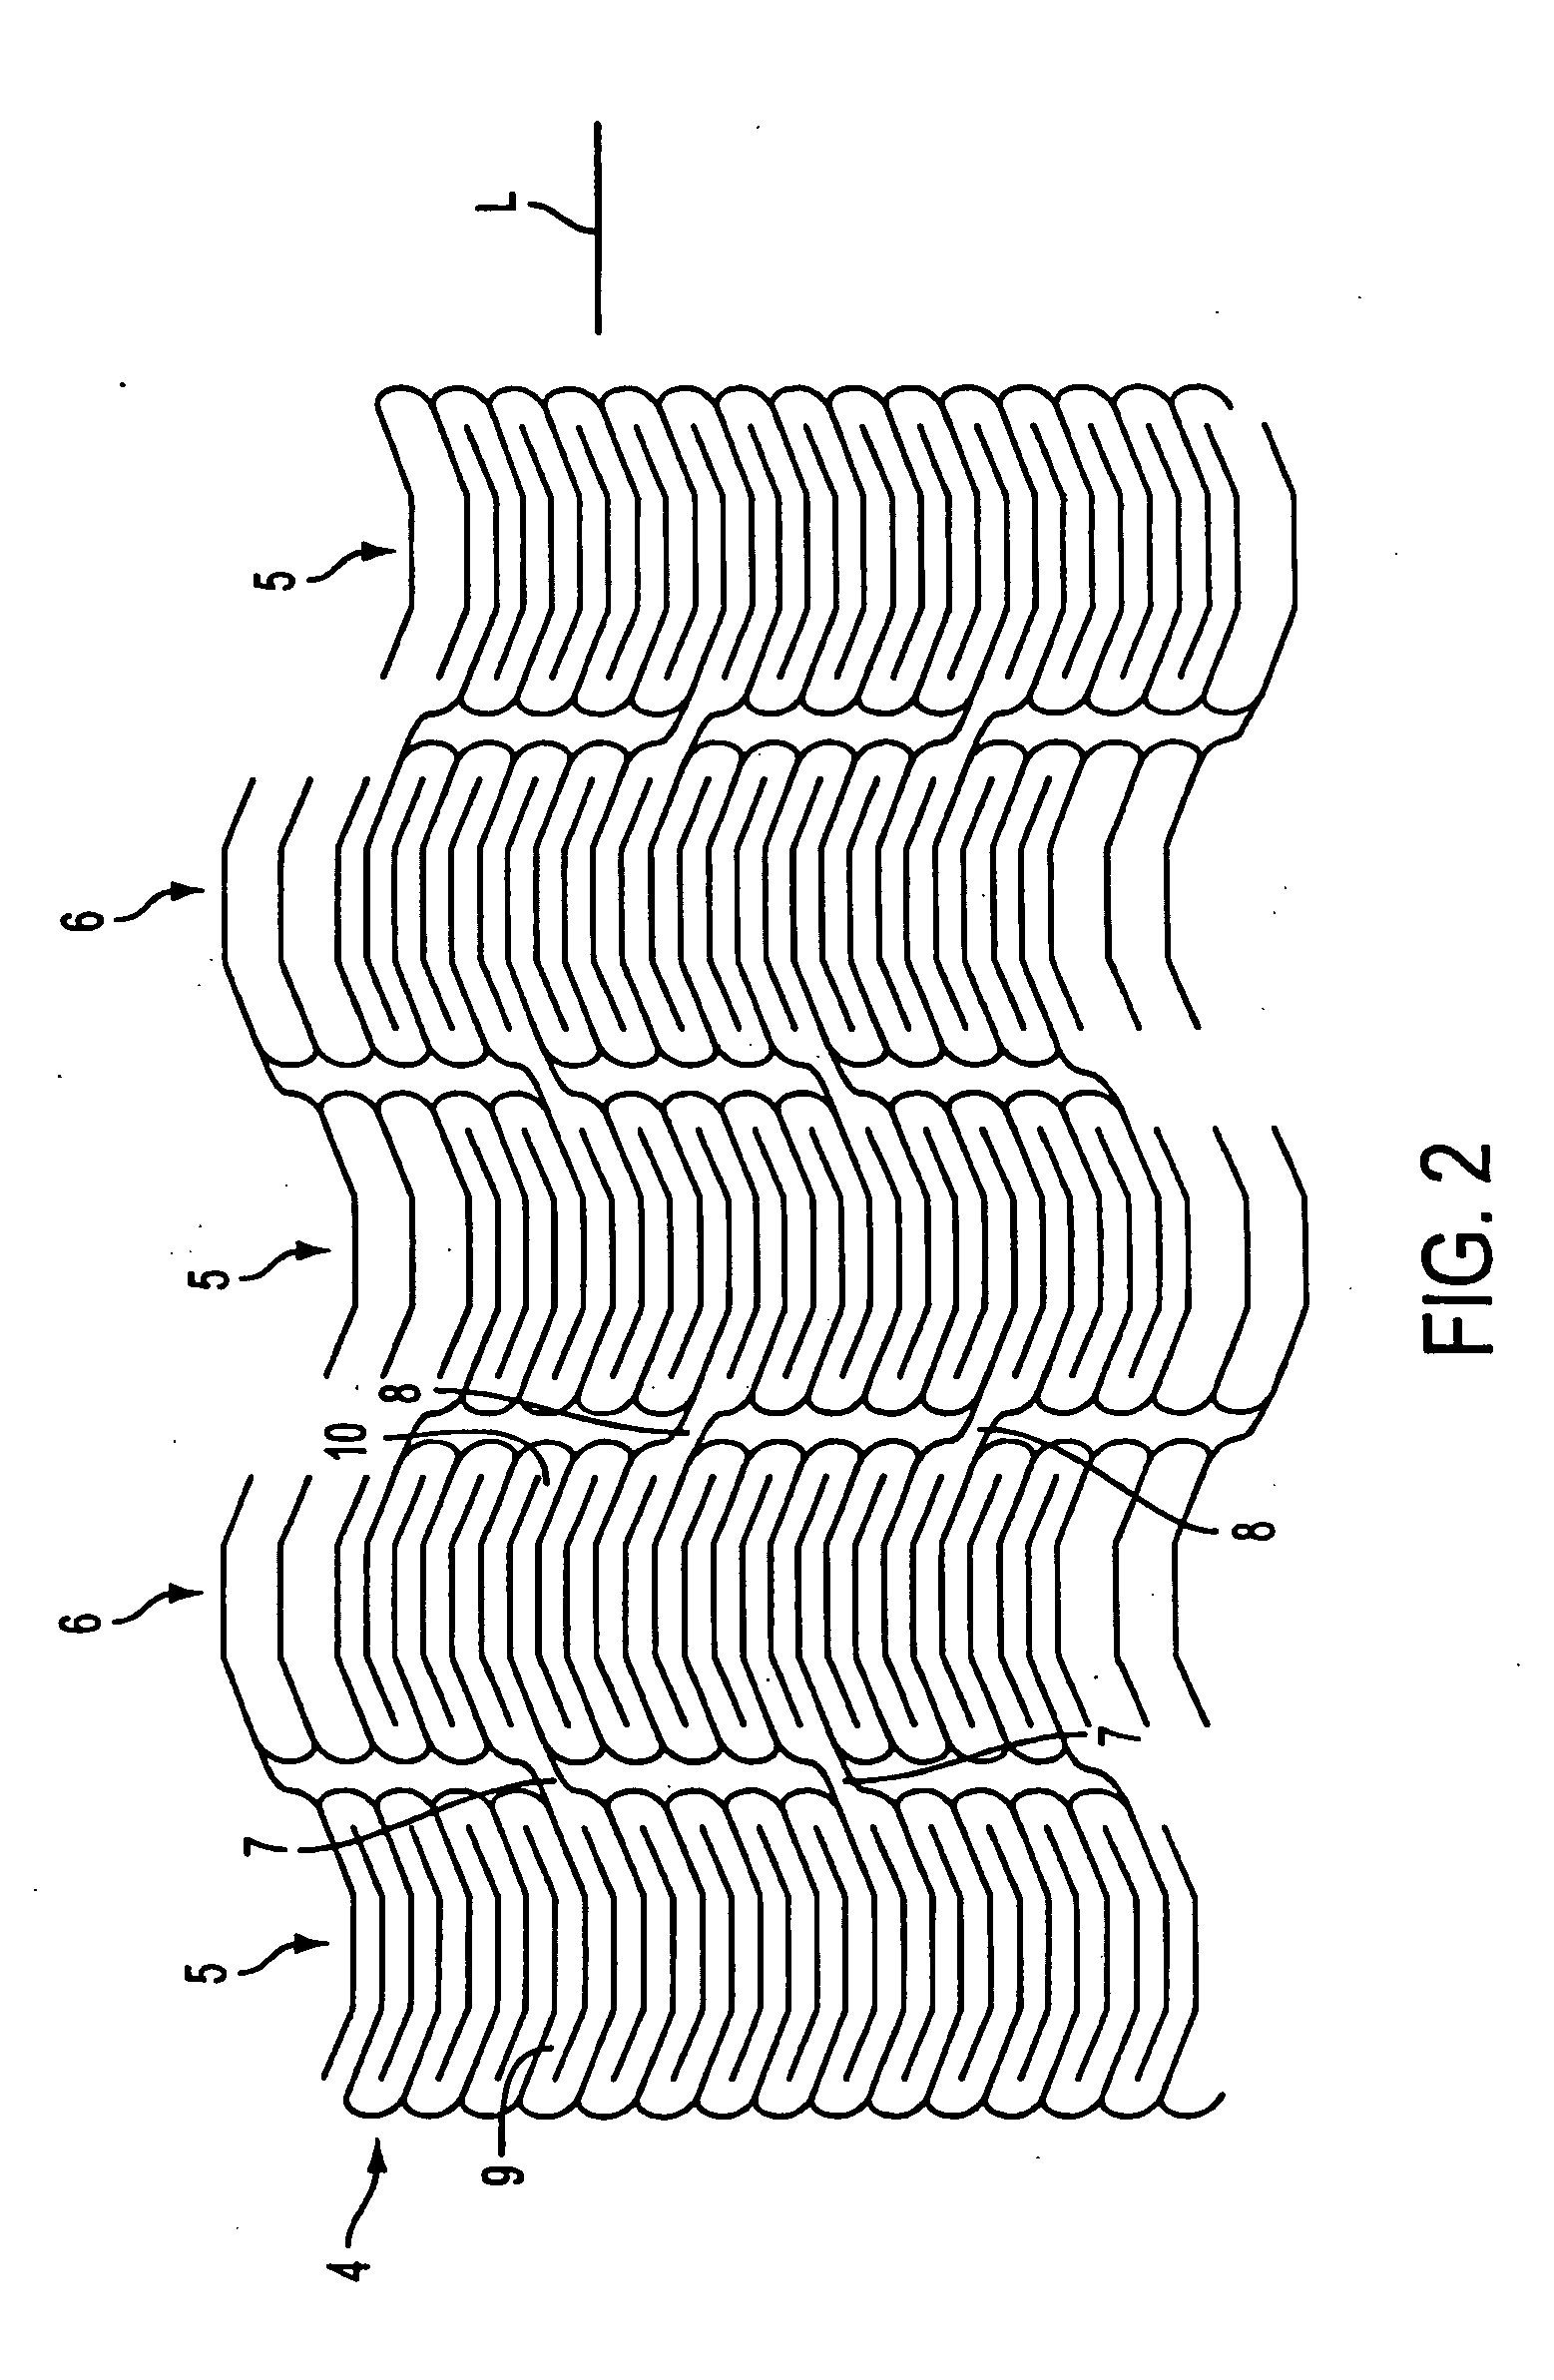 Methods and apparatus for a drug-coated stent having an expandable web structure